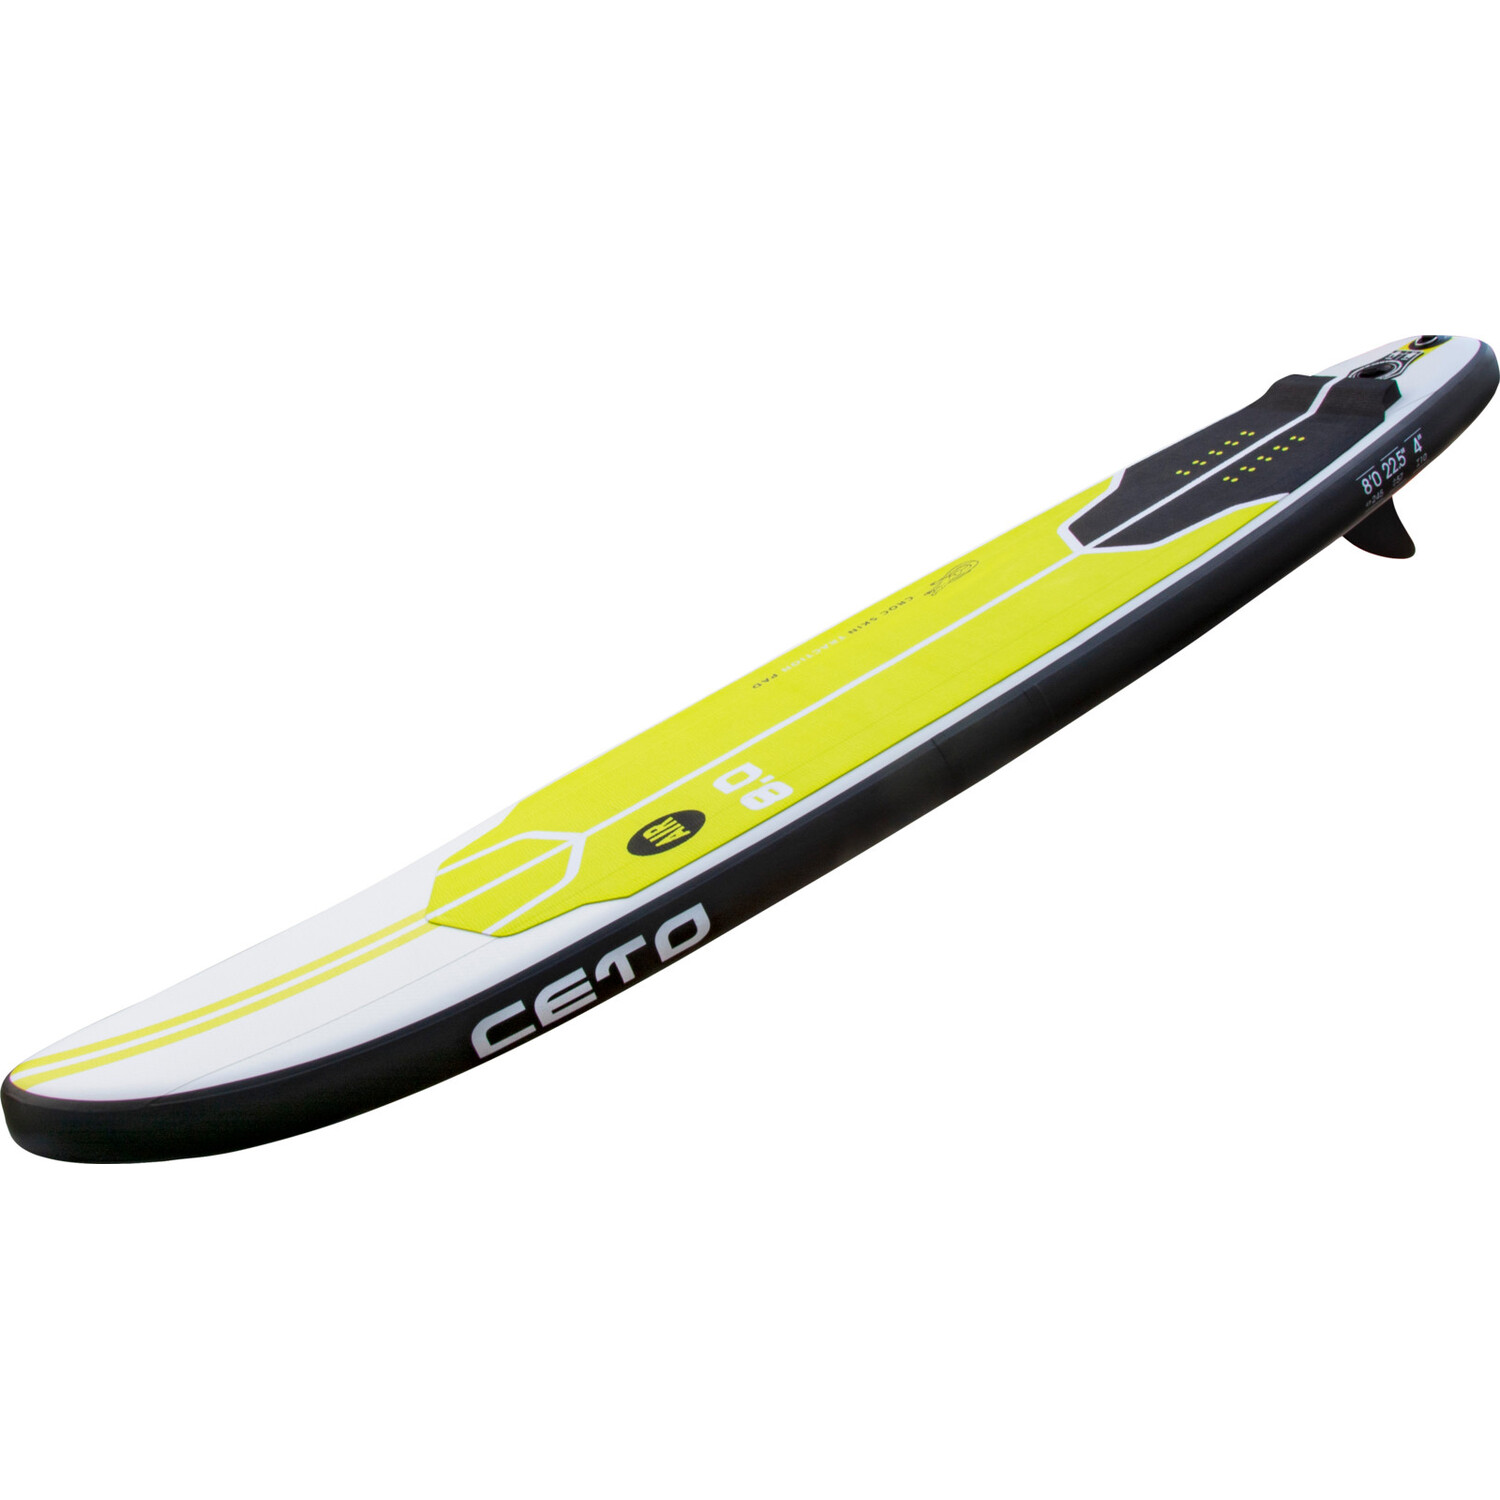 XQMAX 245 Surf Paddle Board - Lime Image 2